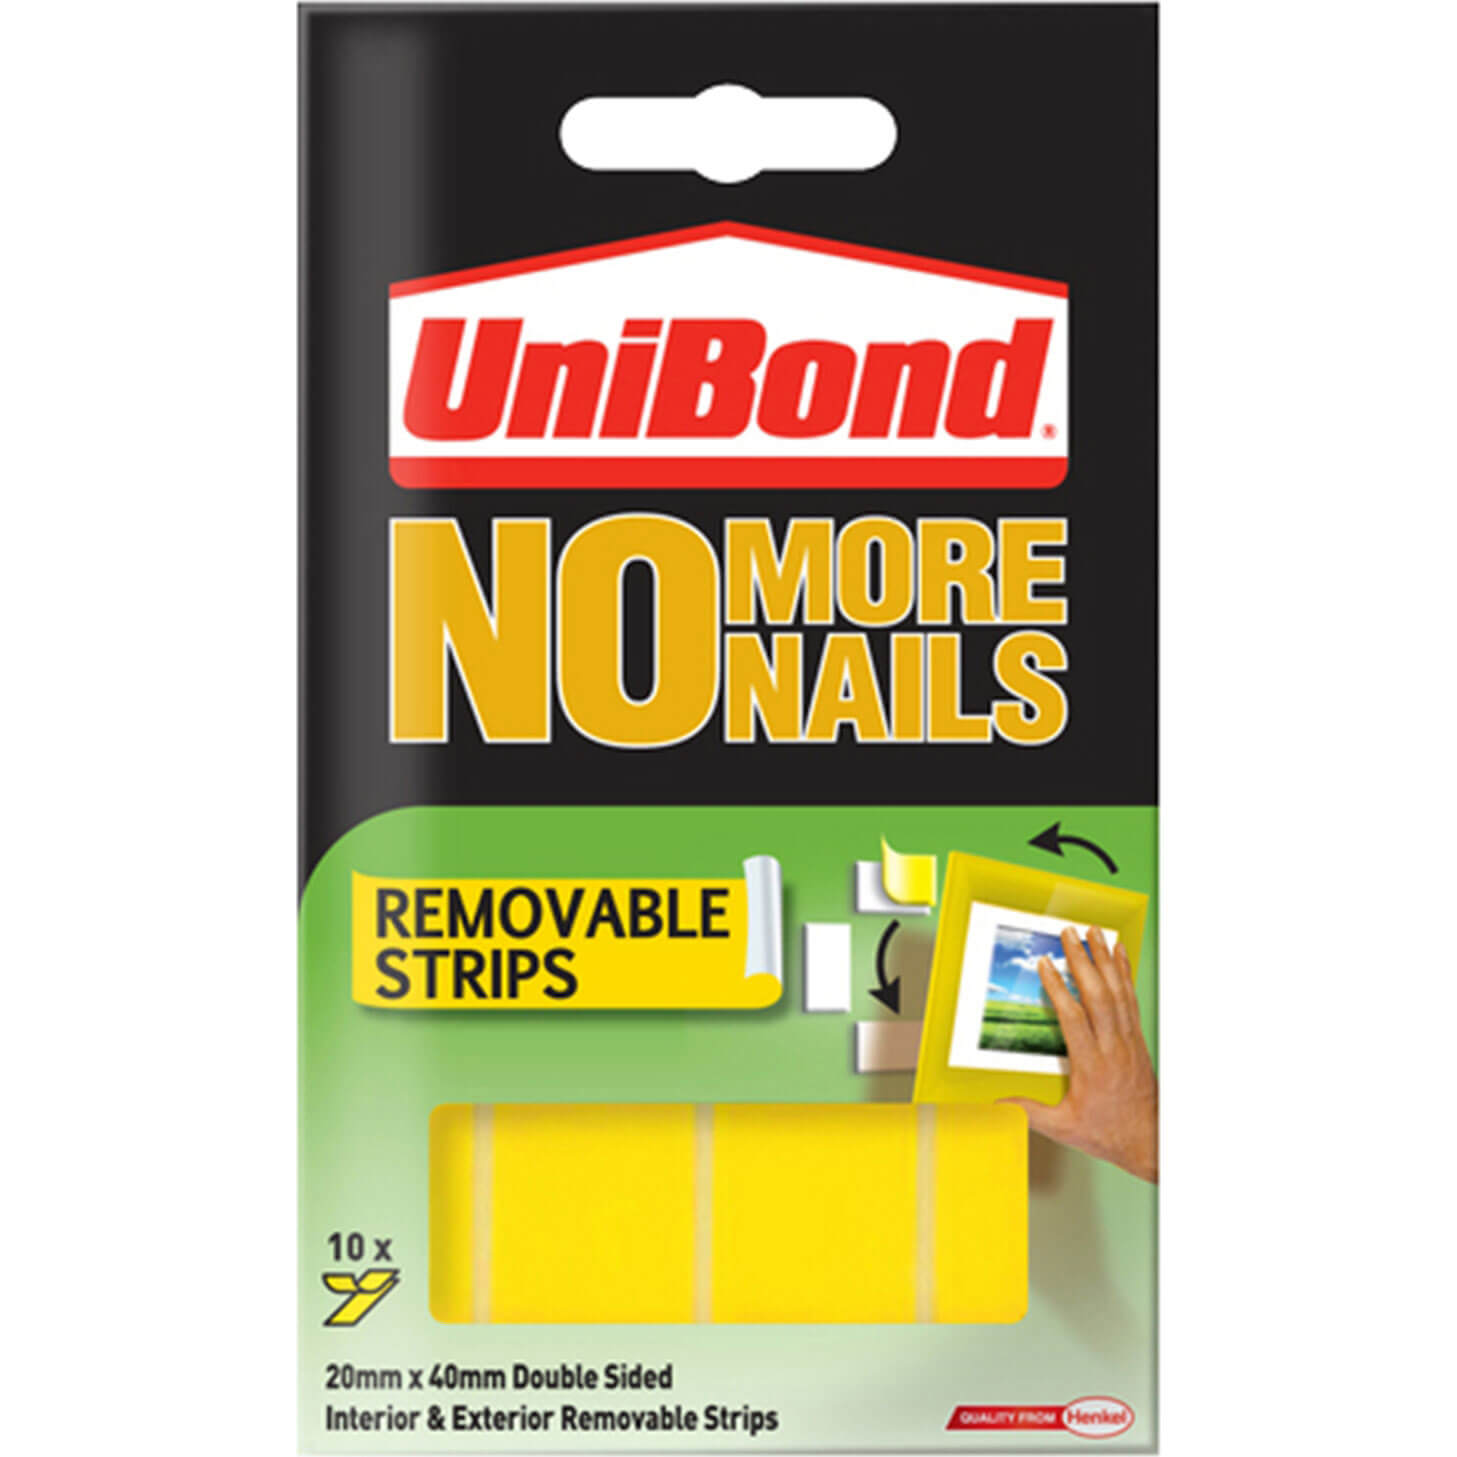 Unibond No More Nails Removable Adhesive Strips Pack of 10